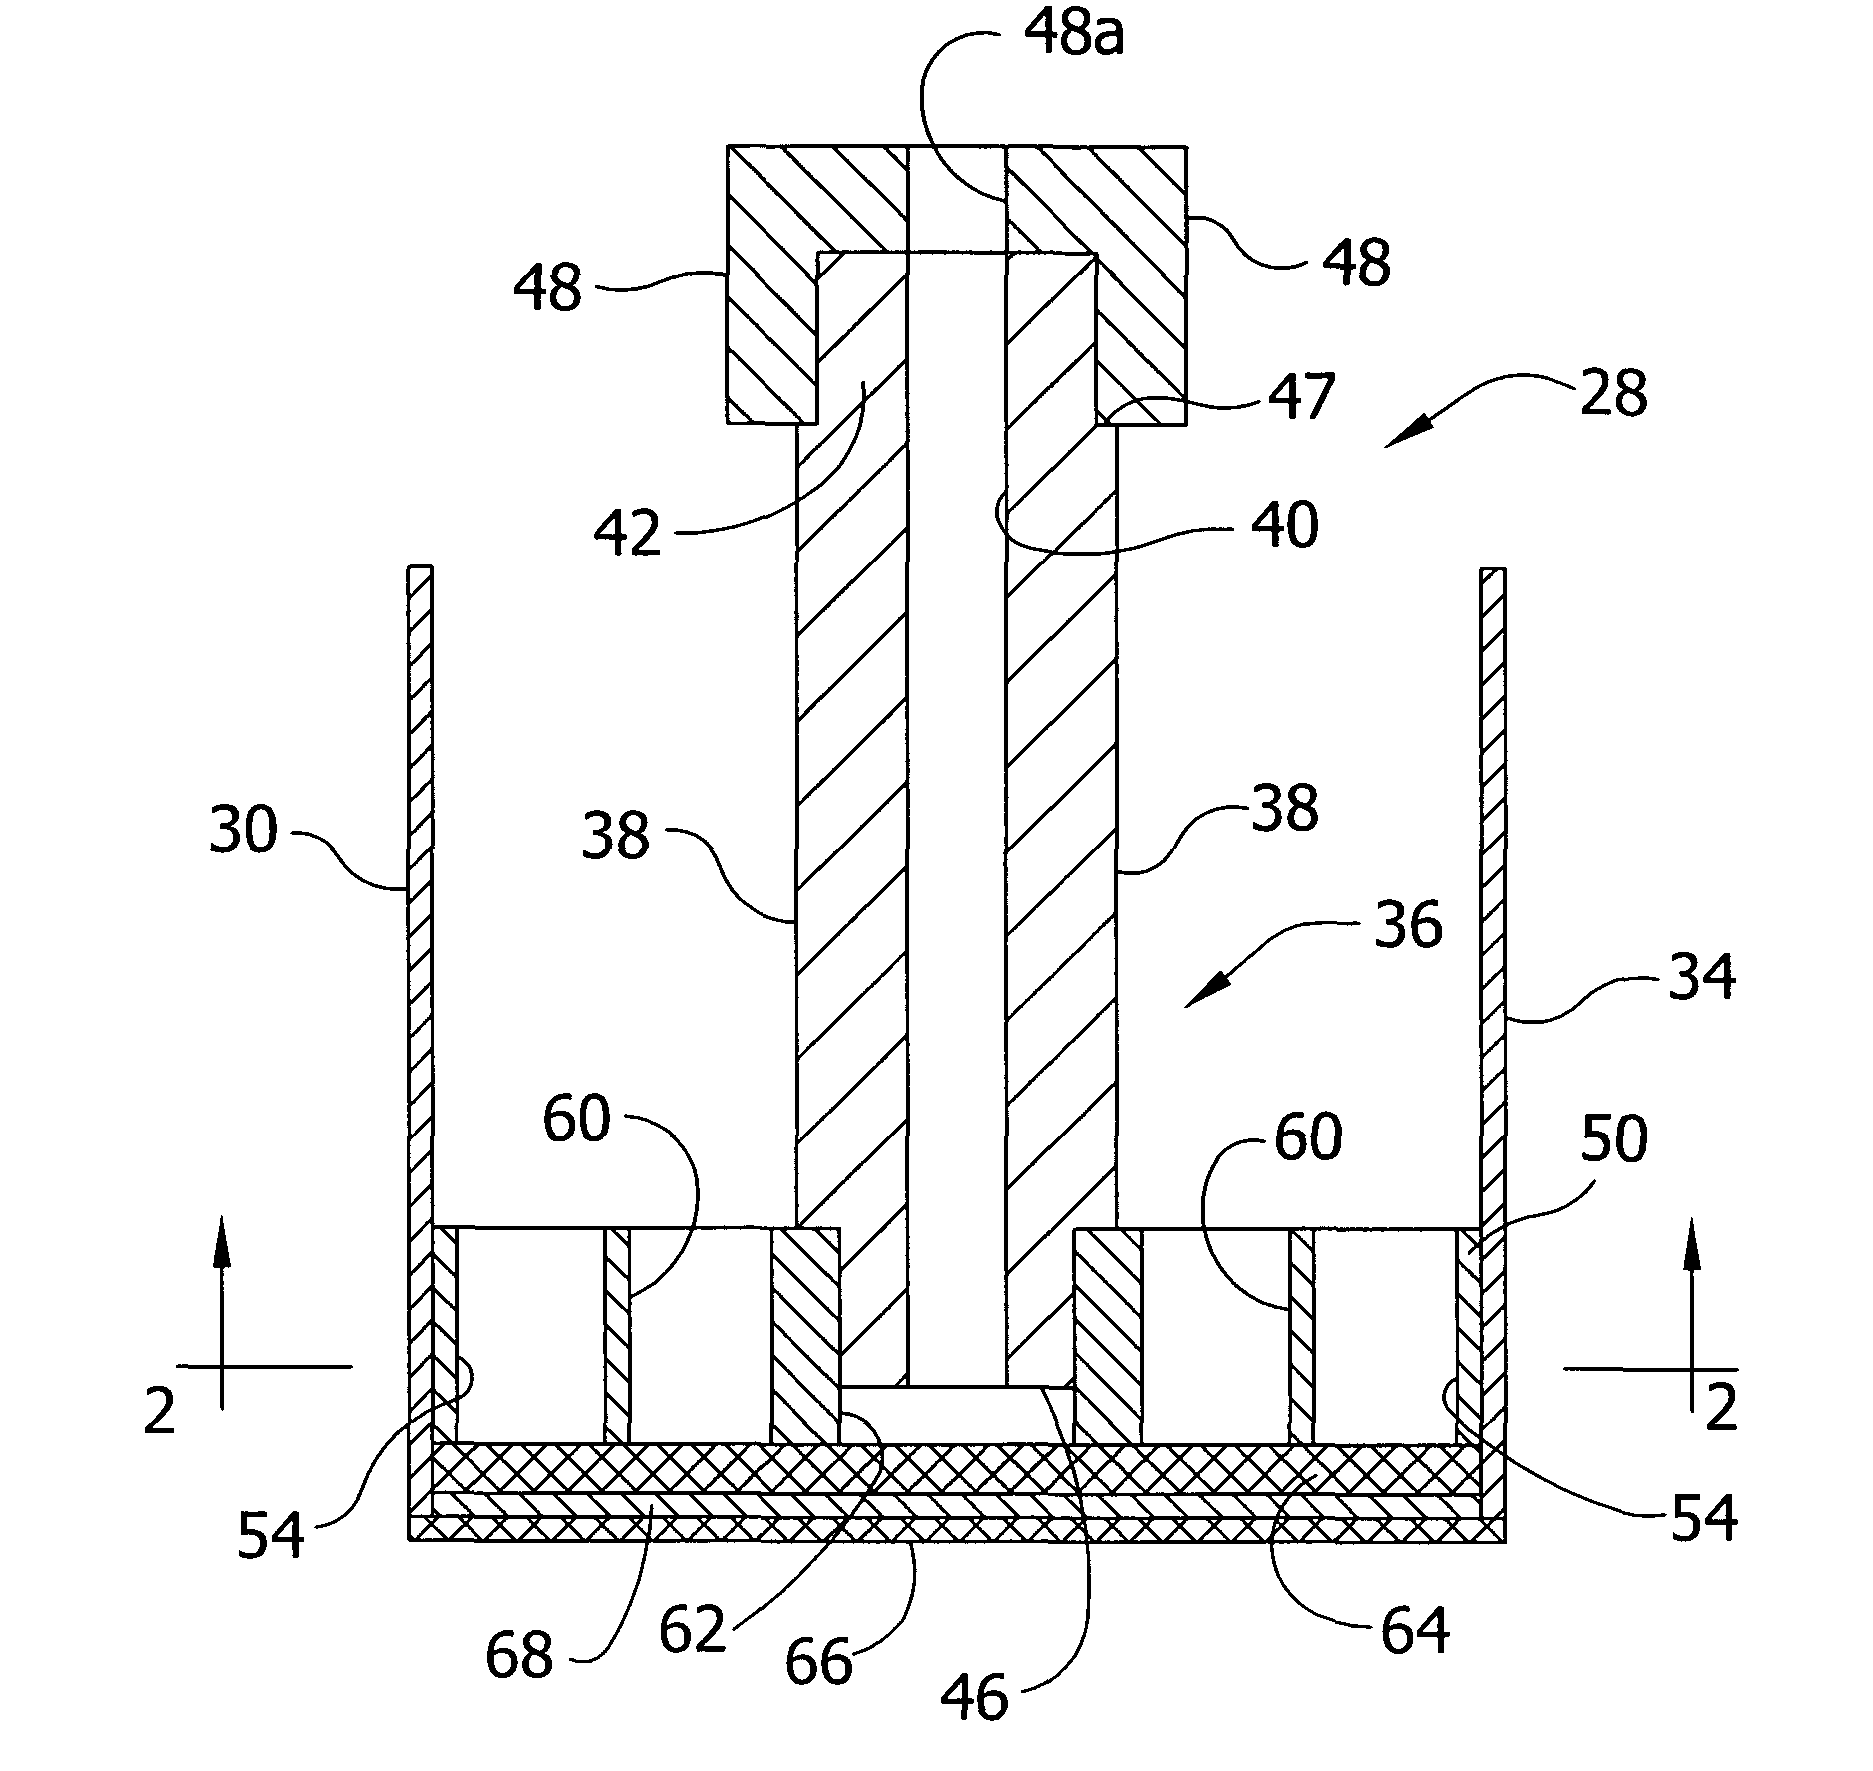 Absorbent materials and absorbent articles incorporating such absorbent materials